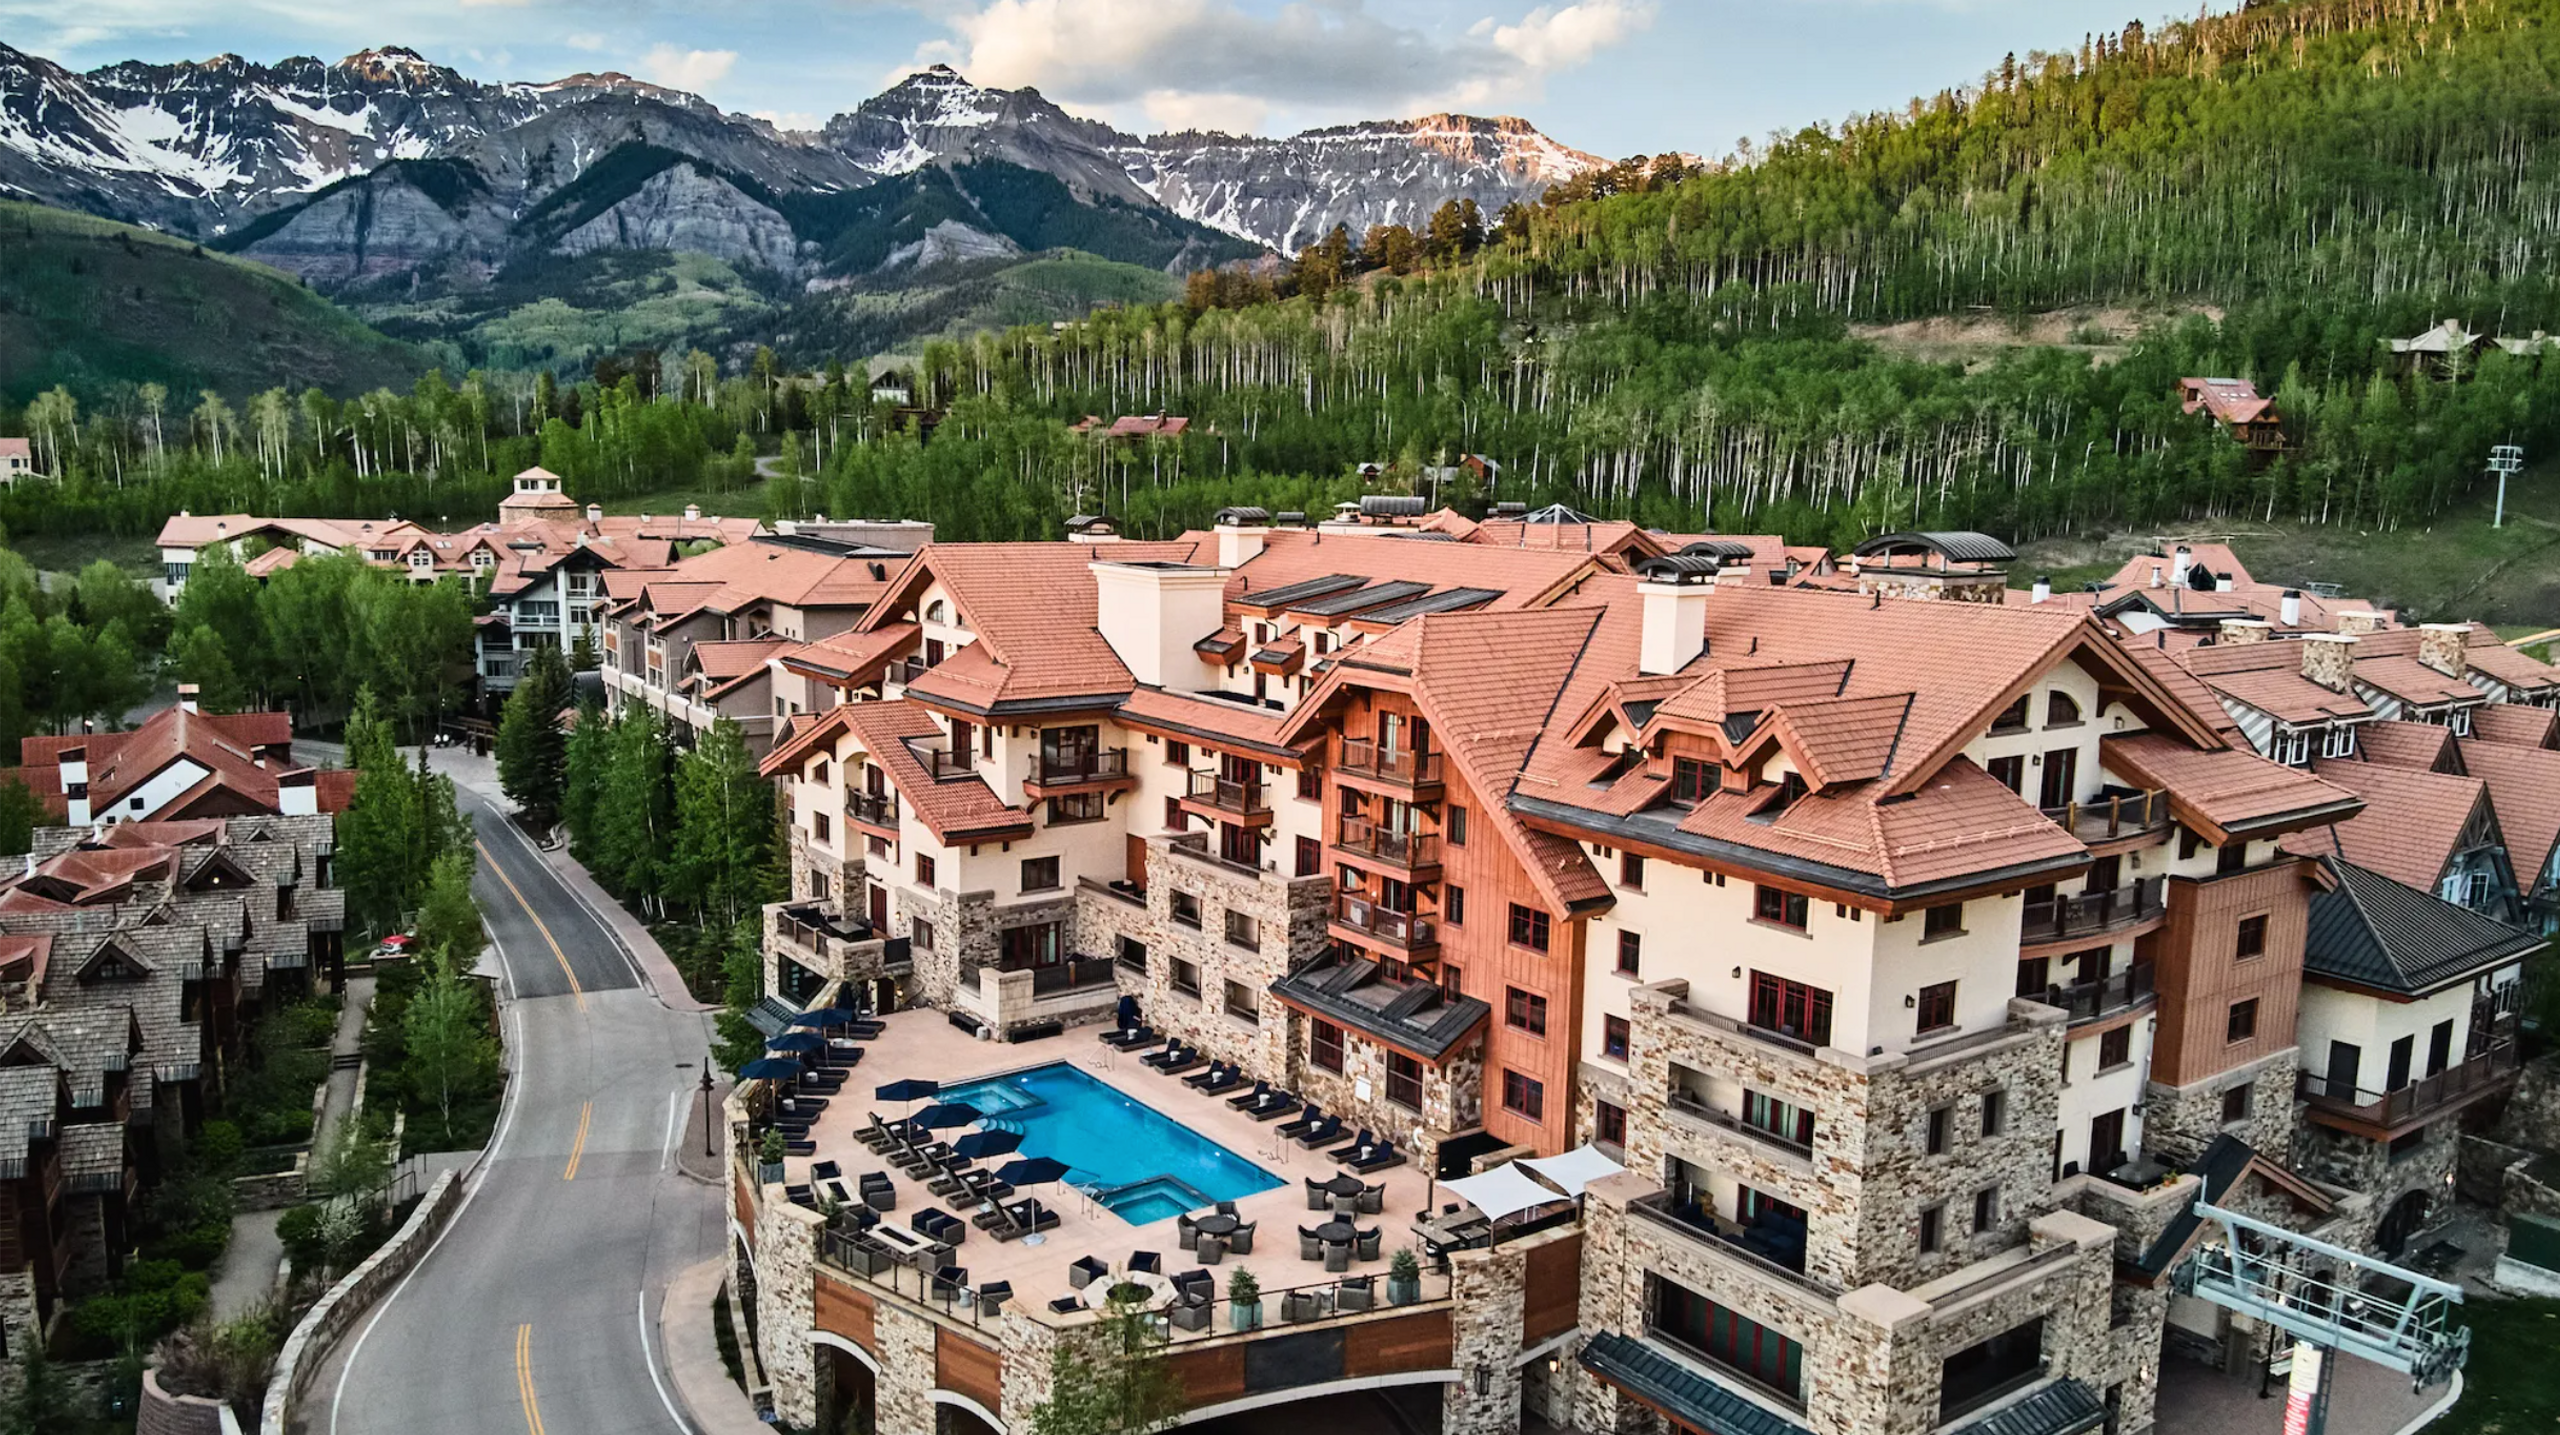 Landscape view of Madeline Hotel in Telluride, Colorado